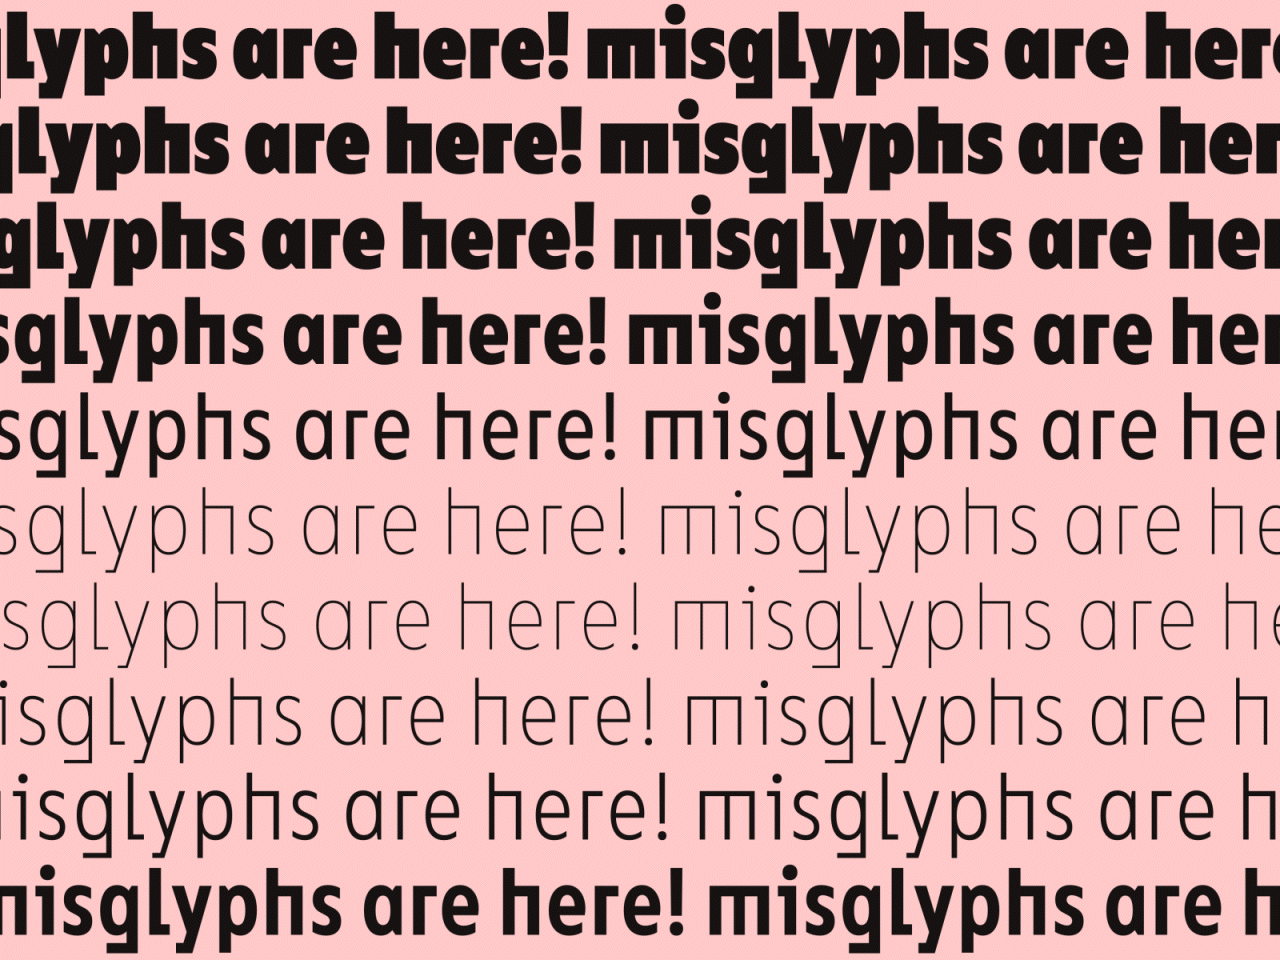 Misglyphs are here! custom letters design letter type typedesign typography variable font